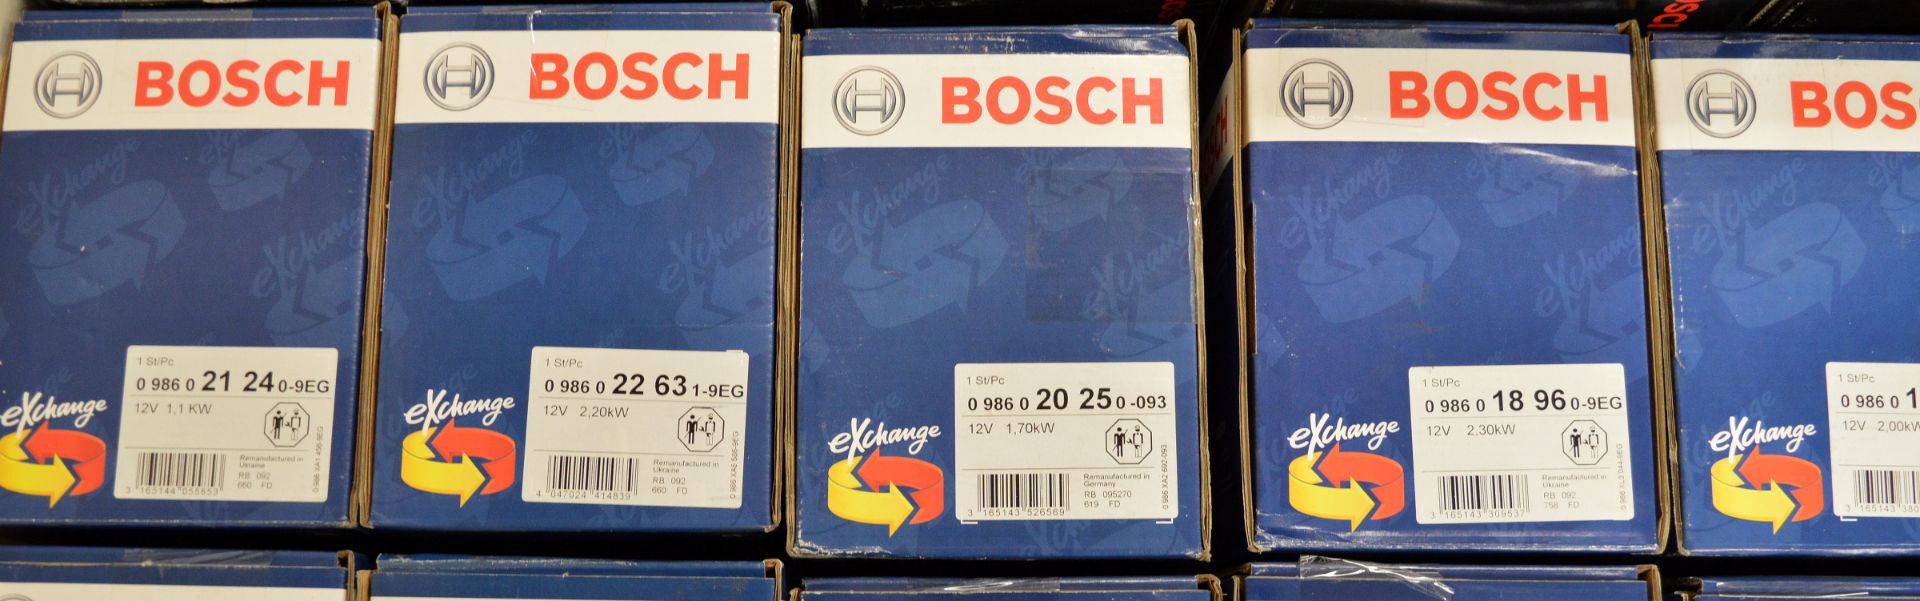 Bosch Starter Motors - See photos for part numbers - Image 4 of 5